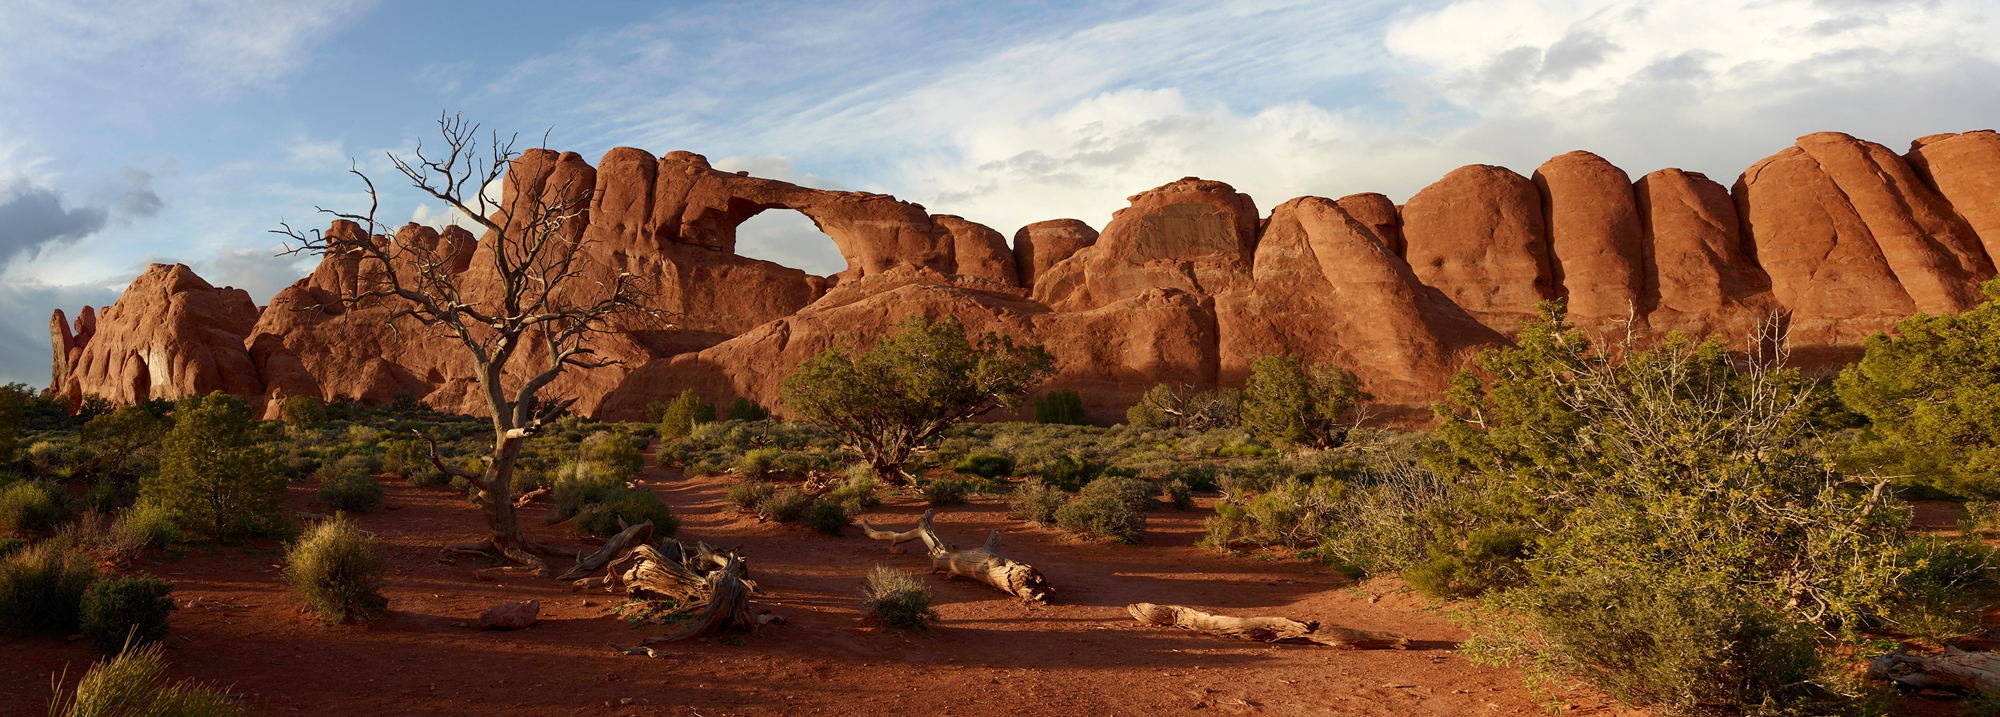 Arches NP, 6 image stitch, Phase One camera